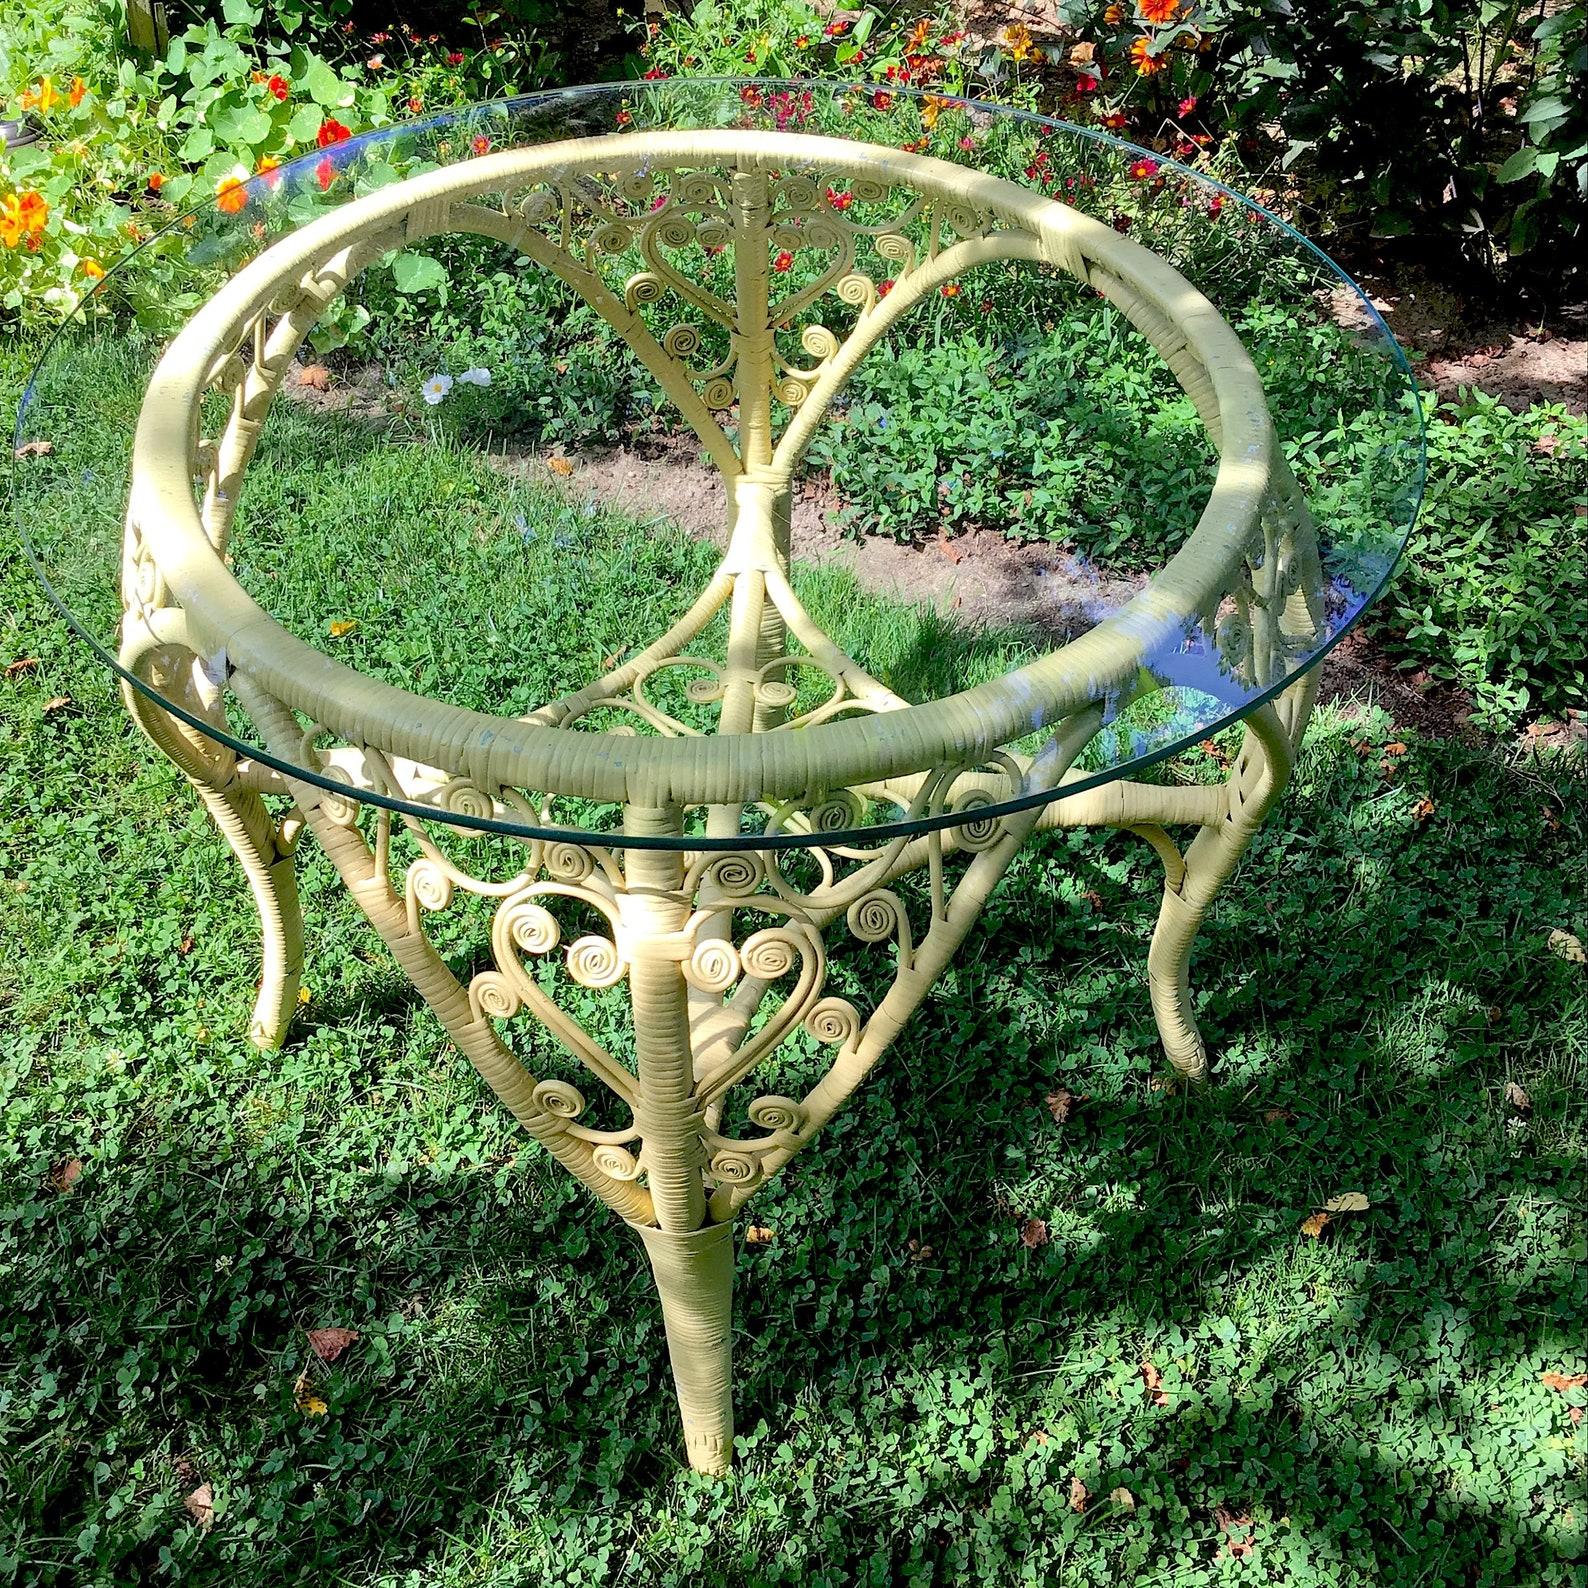 A yellow scroll wicker table with glass top, boho, eclectic, heart shaped wicker.
The patio table measures 30